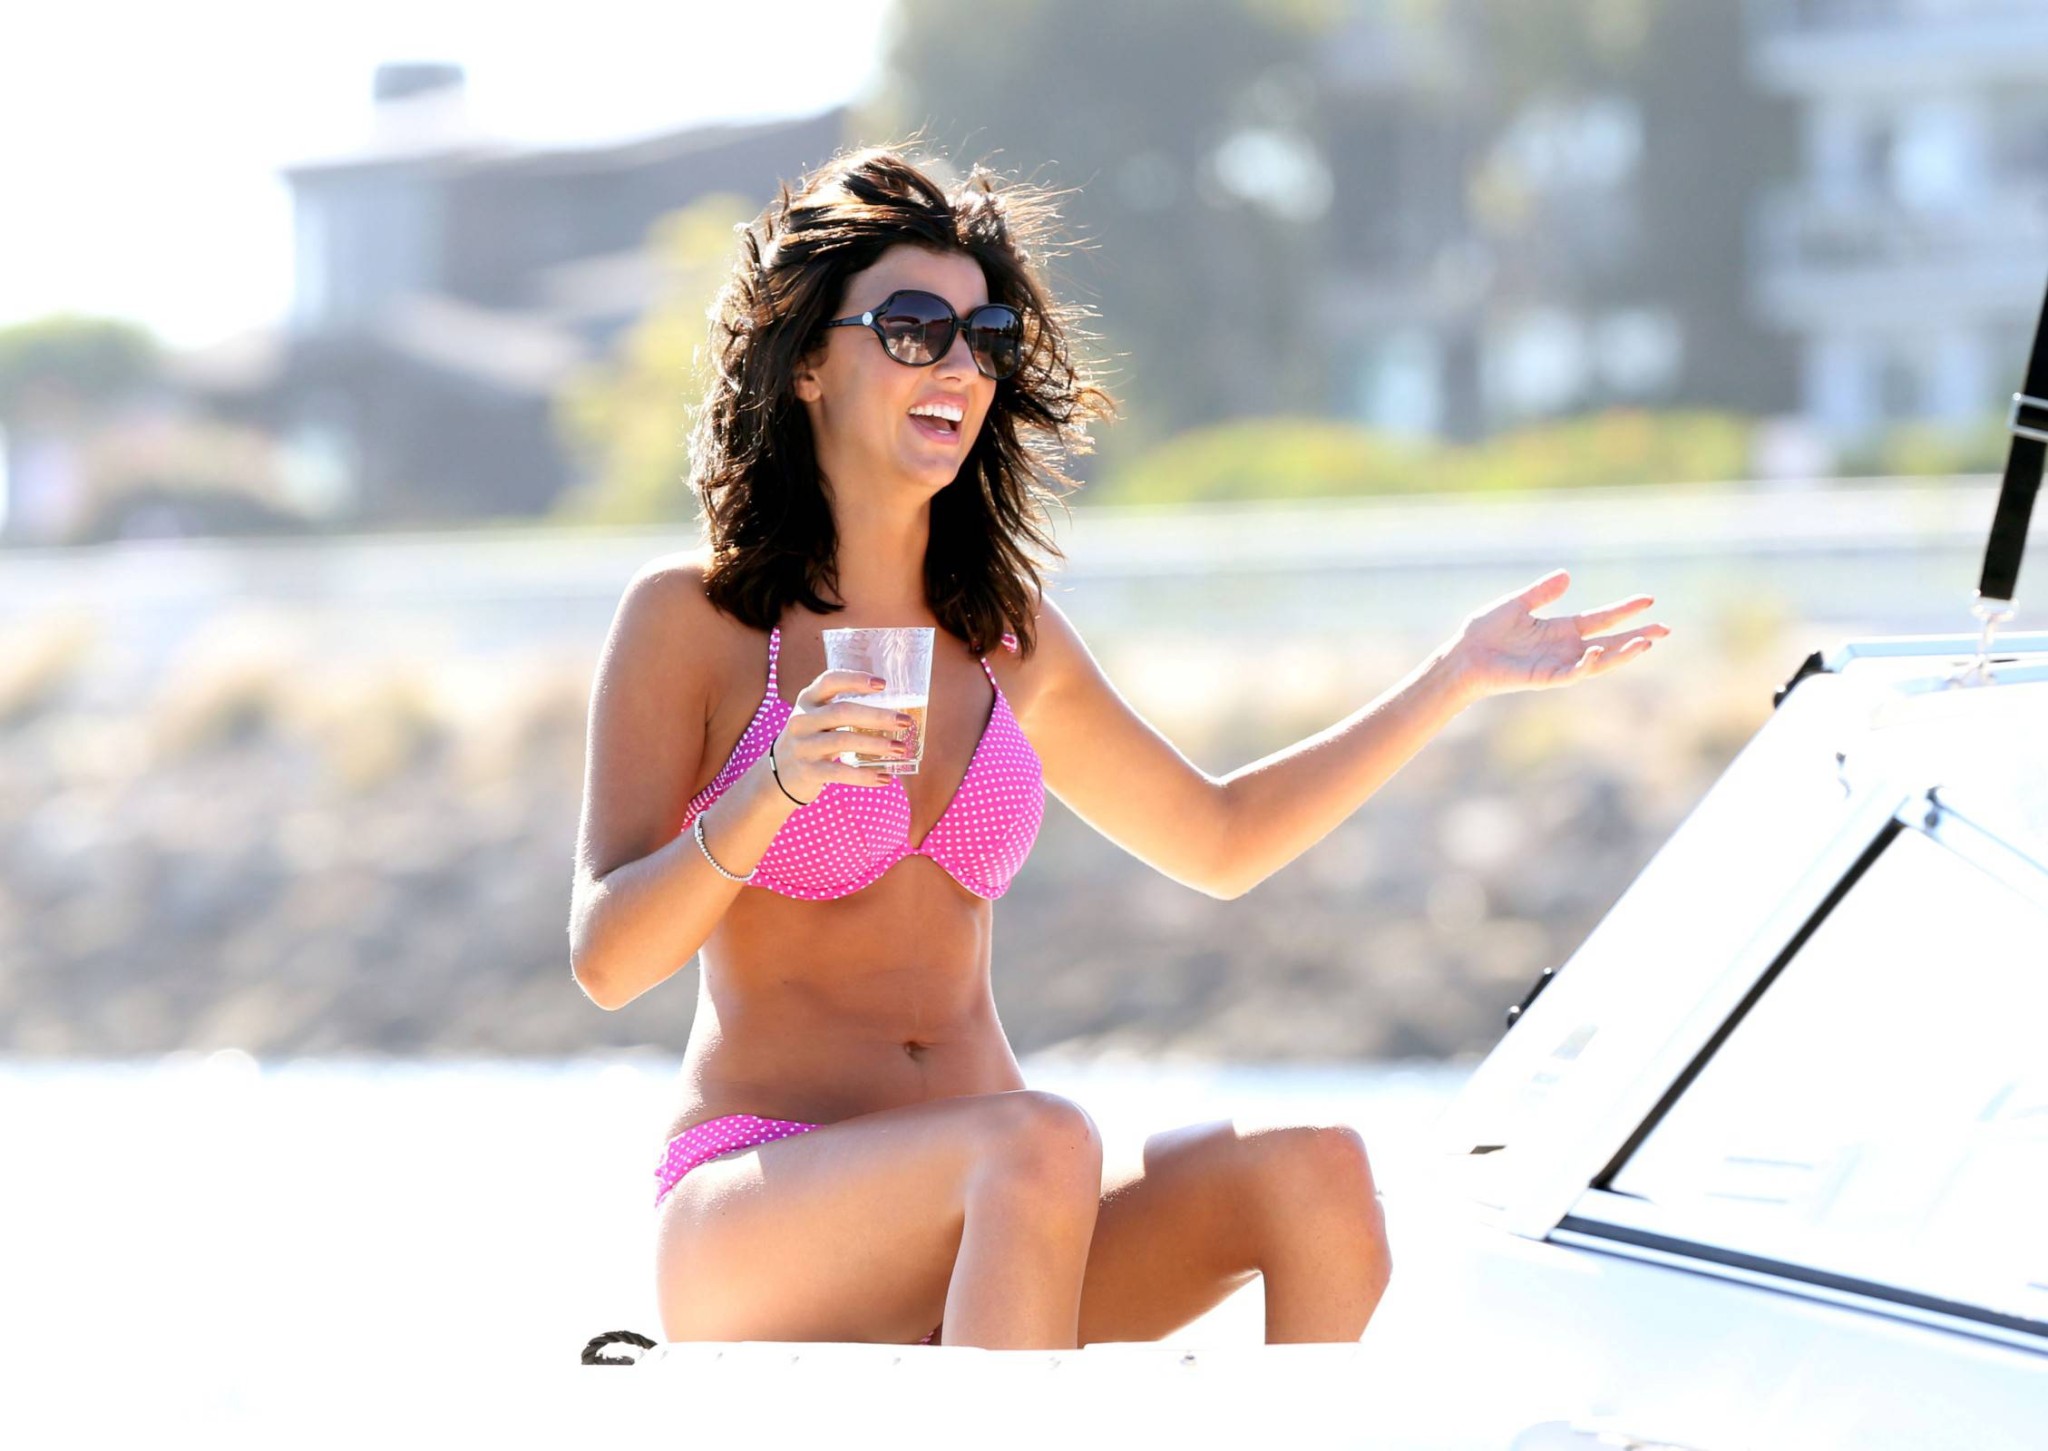 Lucy Mecklenburgh wearing pink polka dot bikini fights with a bottle of Moet at  #75220331